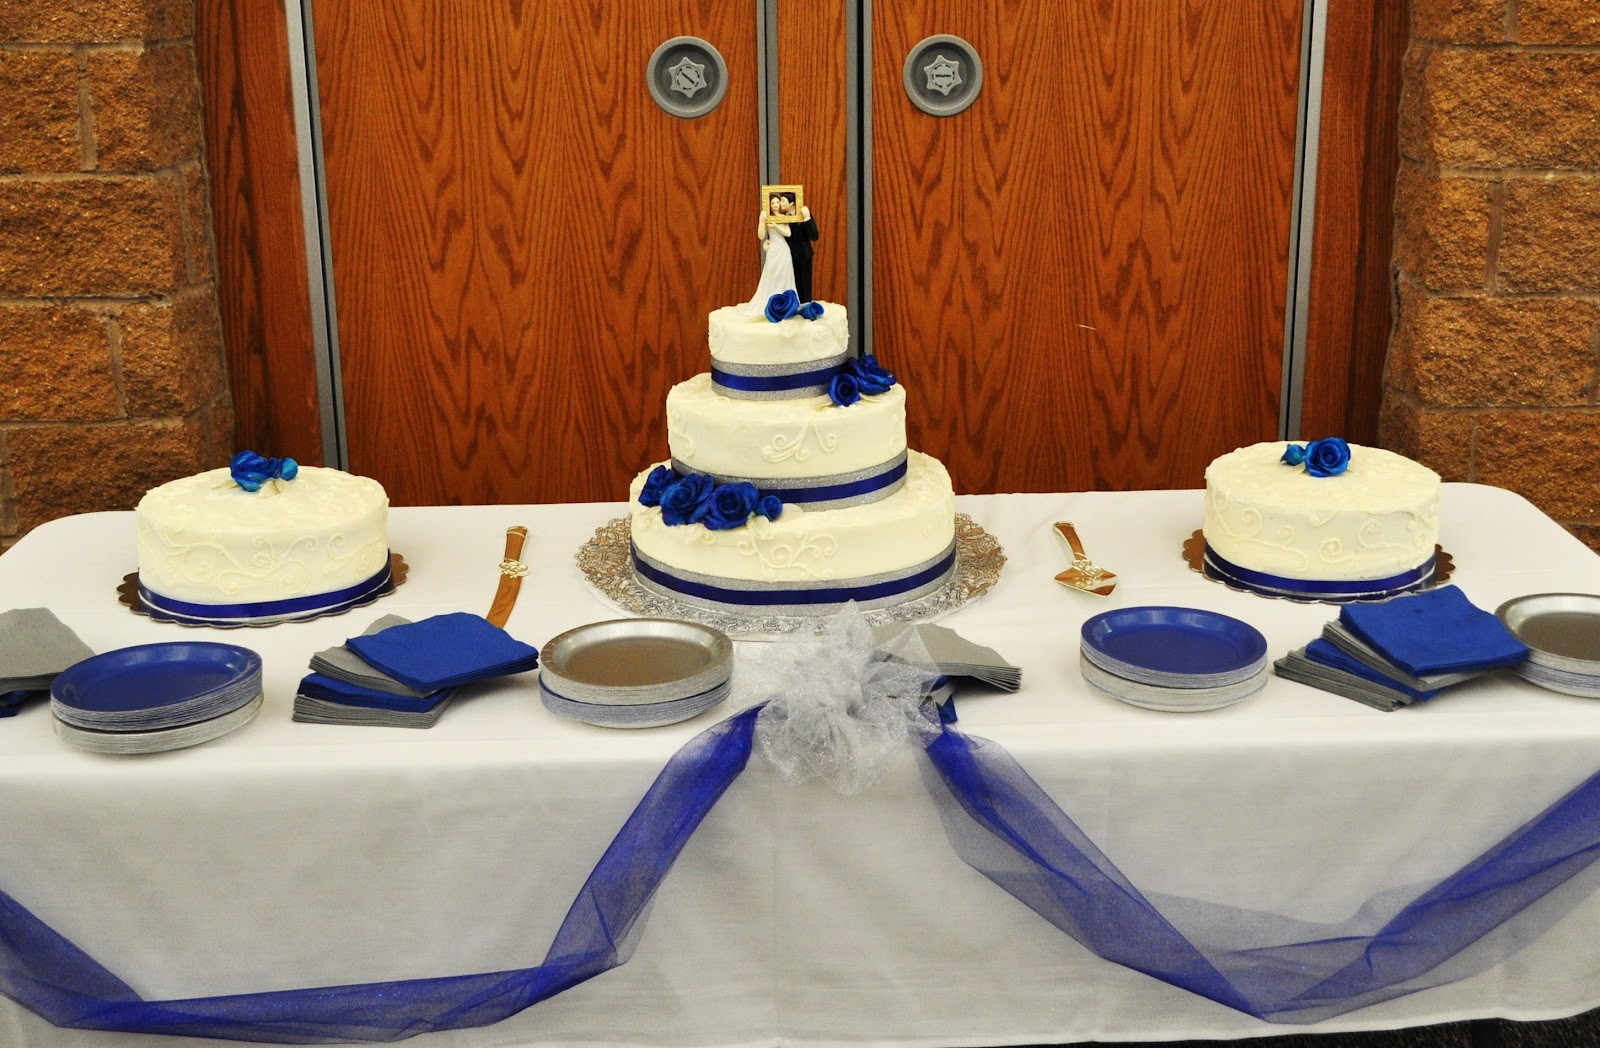 Royal Blue And Silver Wedding Cakes
 CakeJoy Royal Blue and Silver Wedding